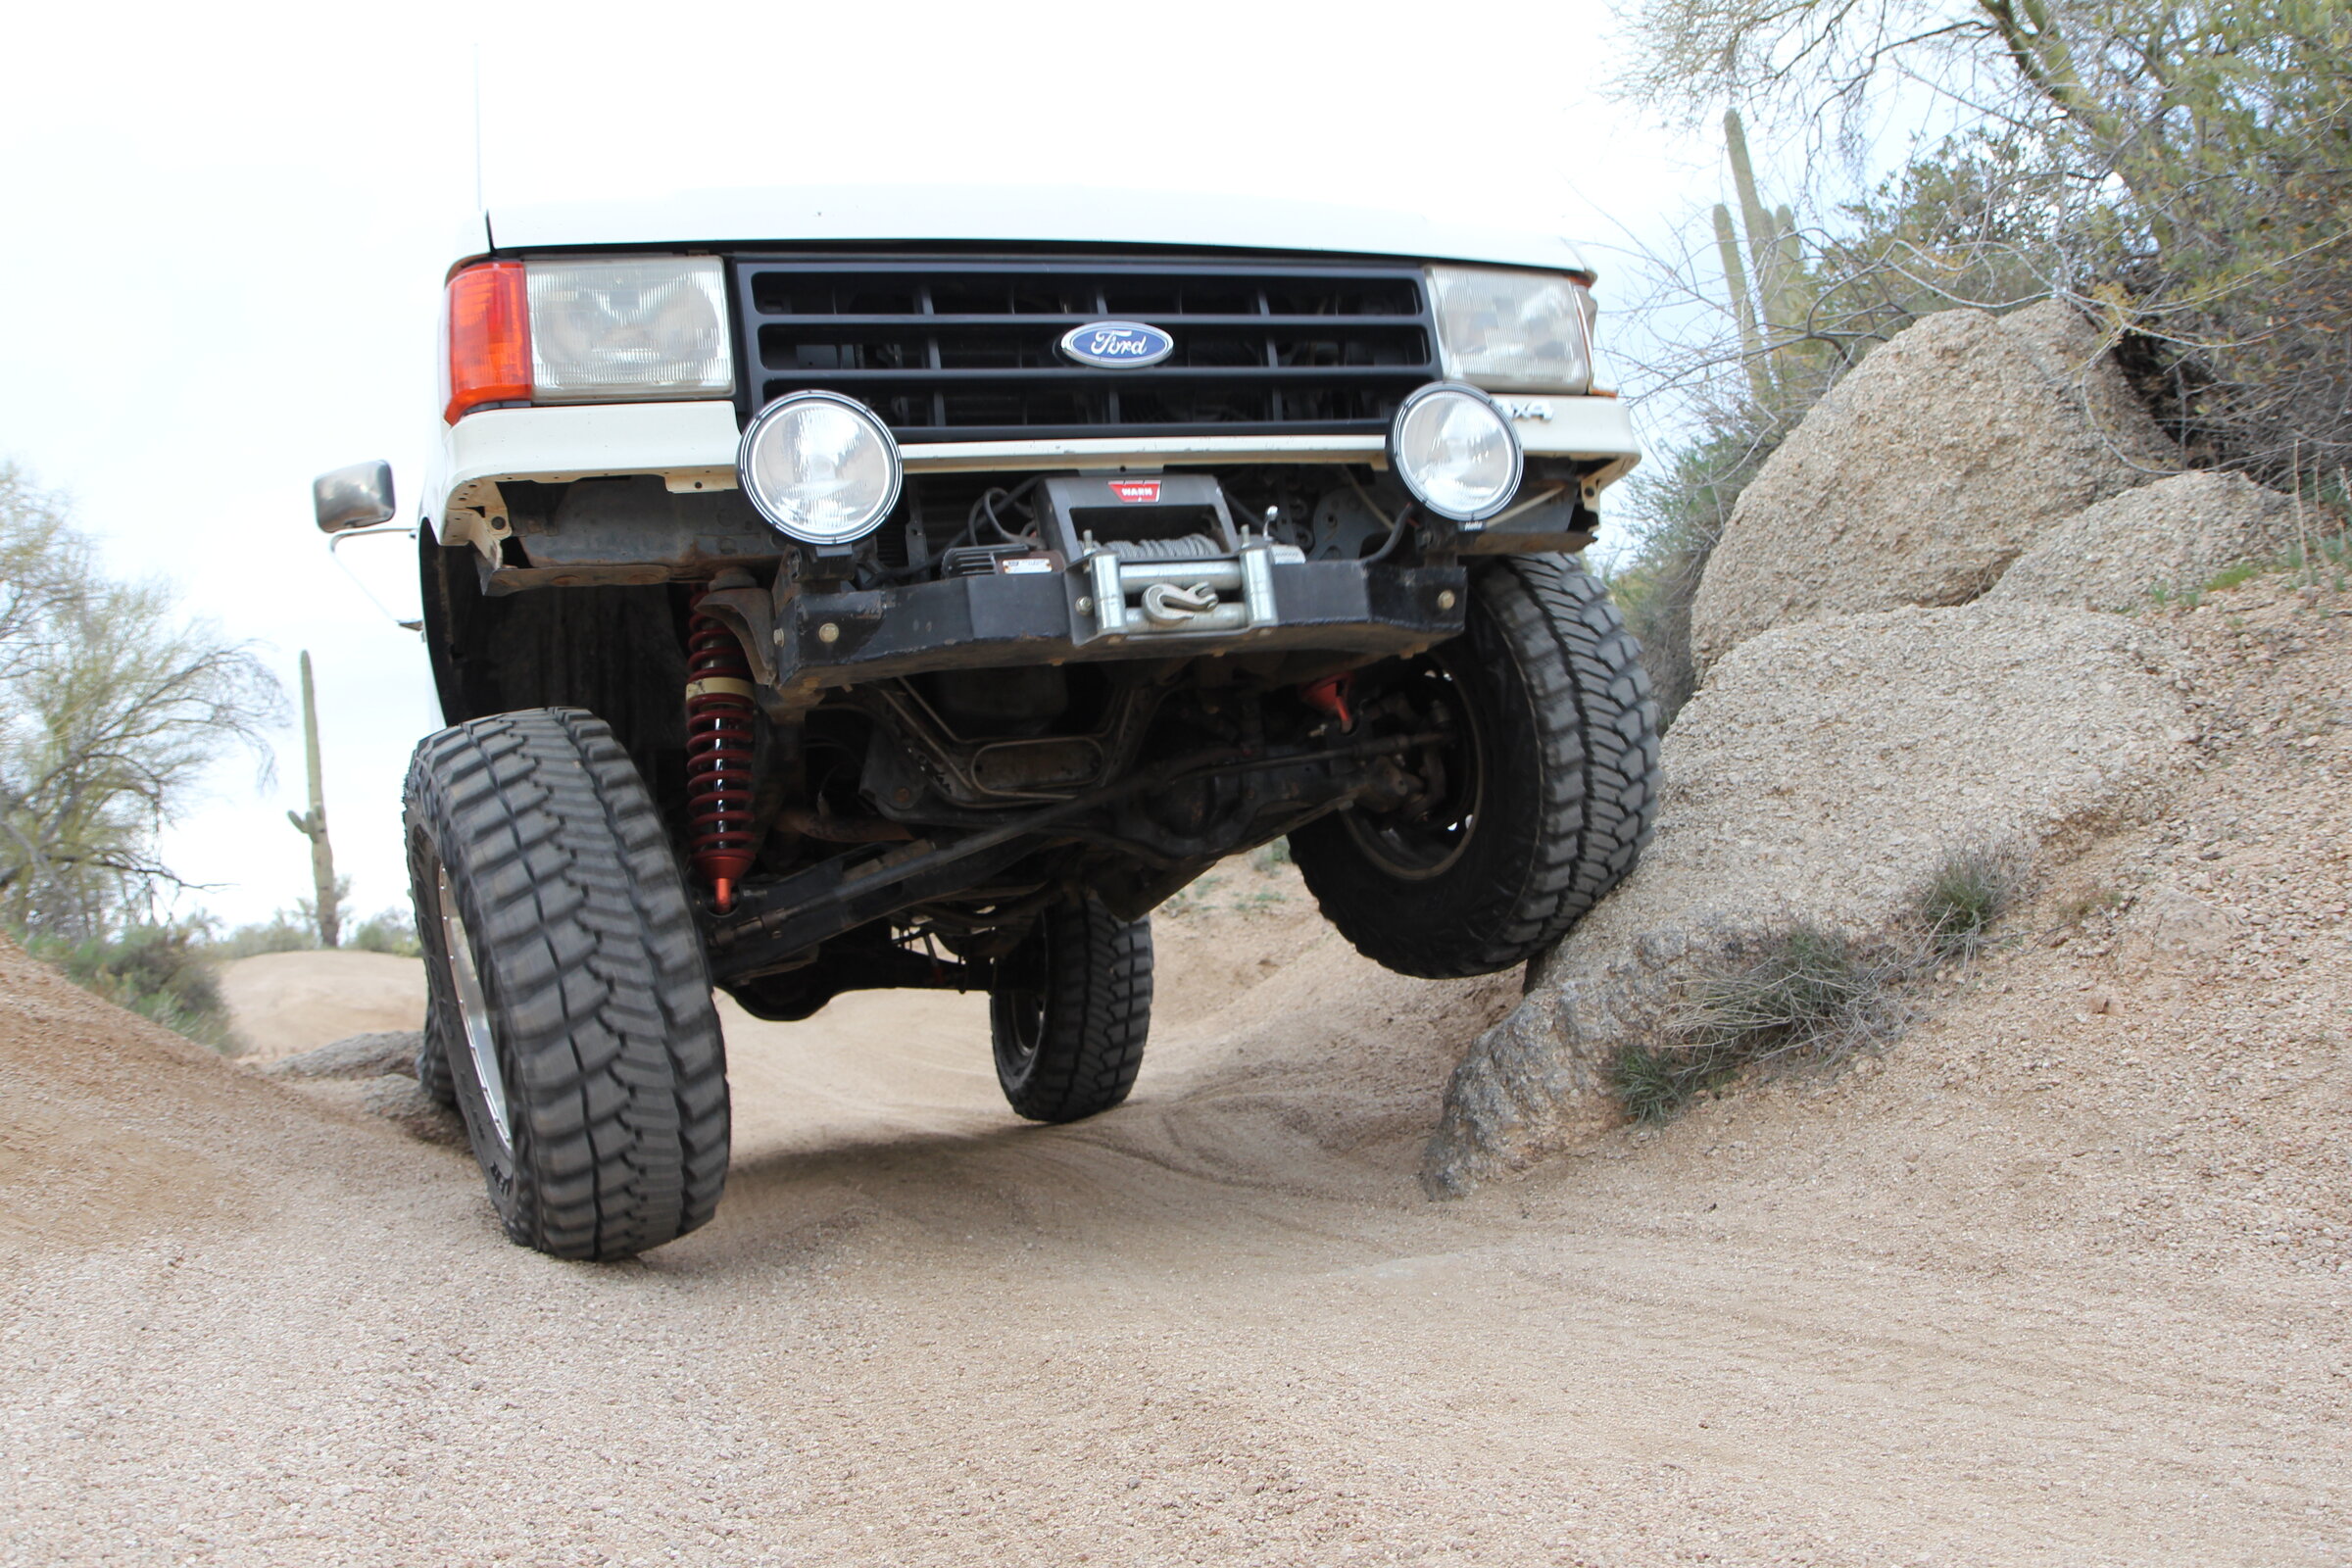 Ford Bronco Base 2dr 7speed vs used Gx470 off-road. Bronco Coilover 2